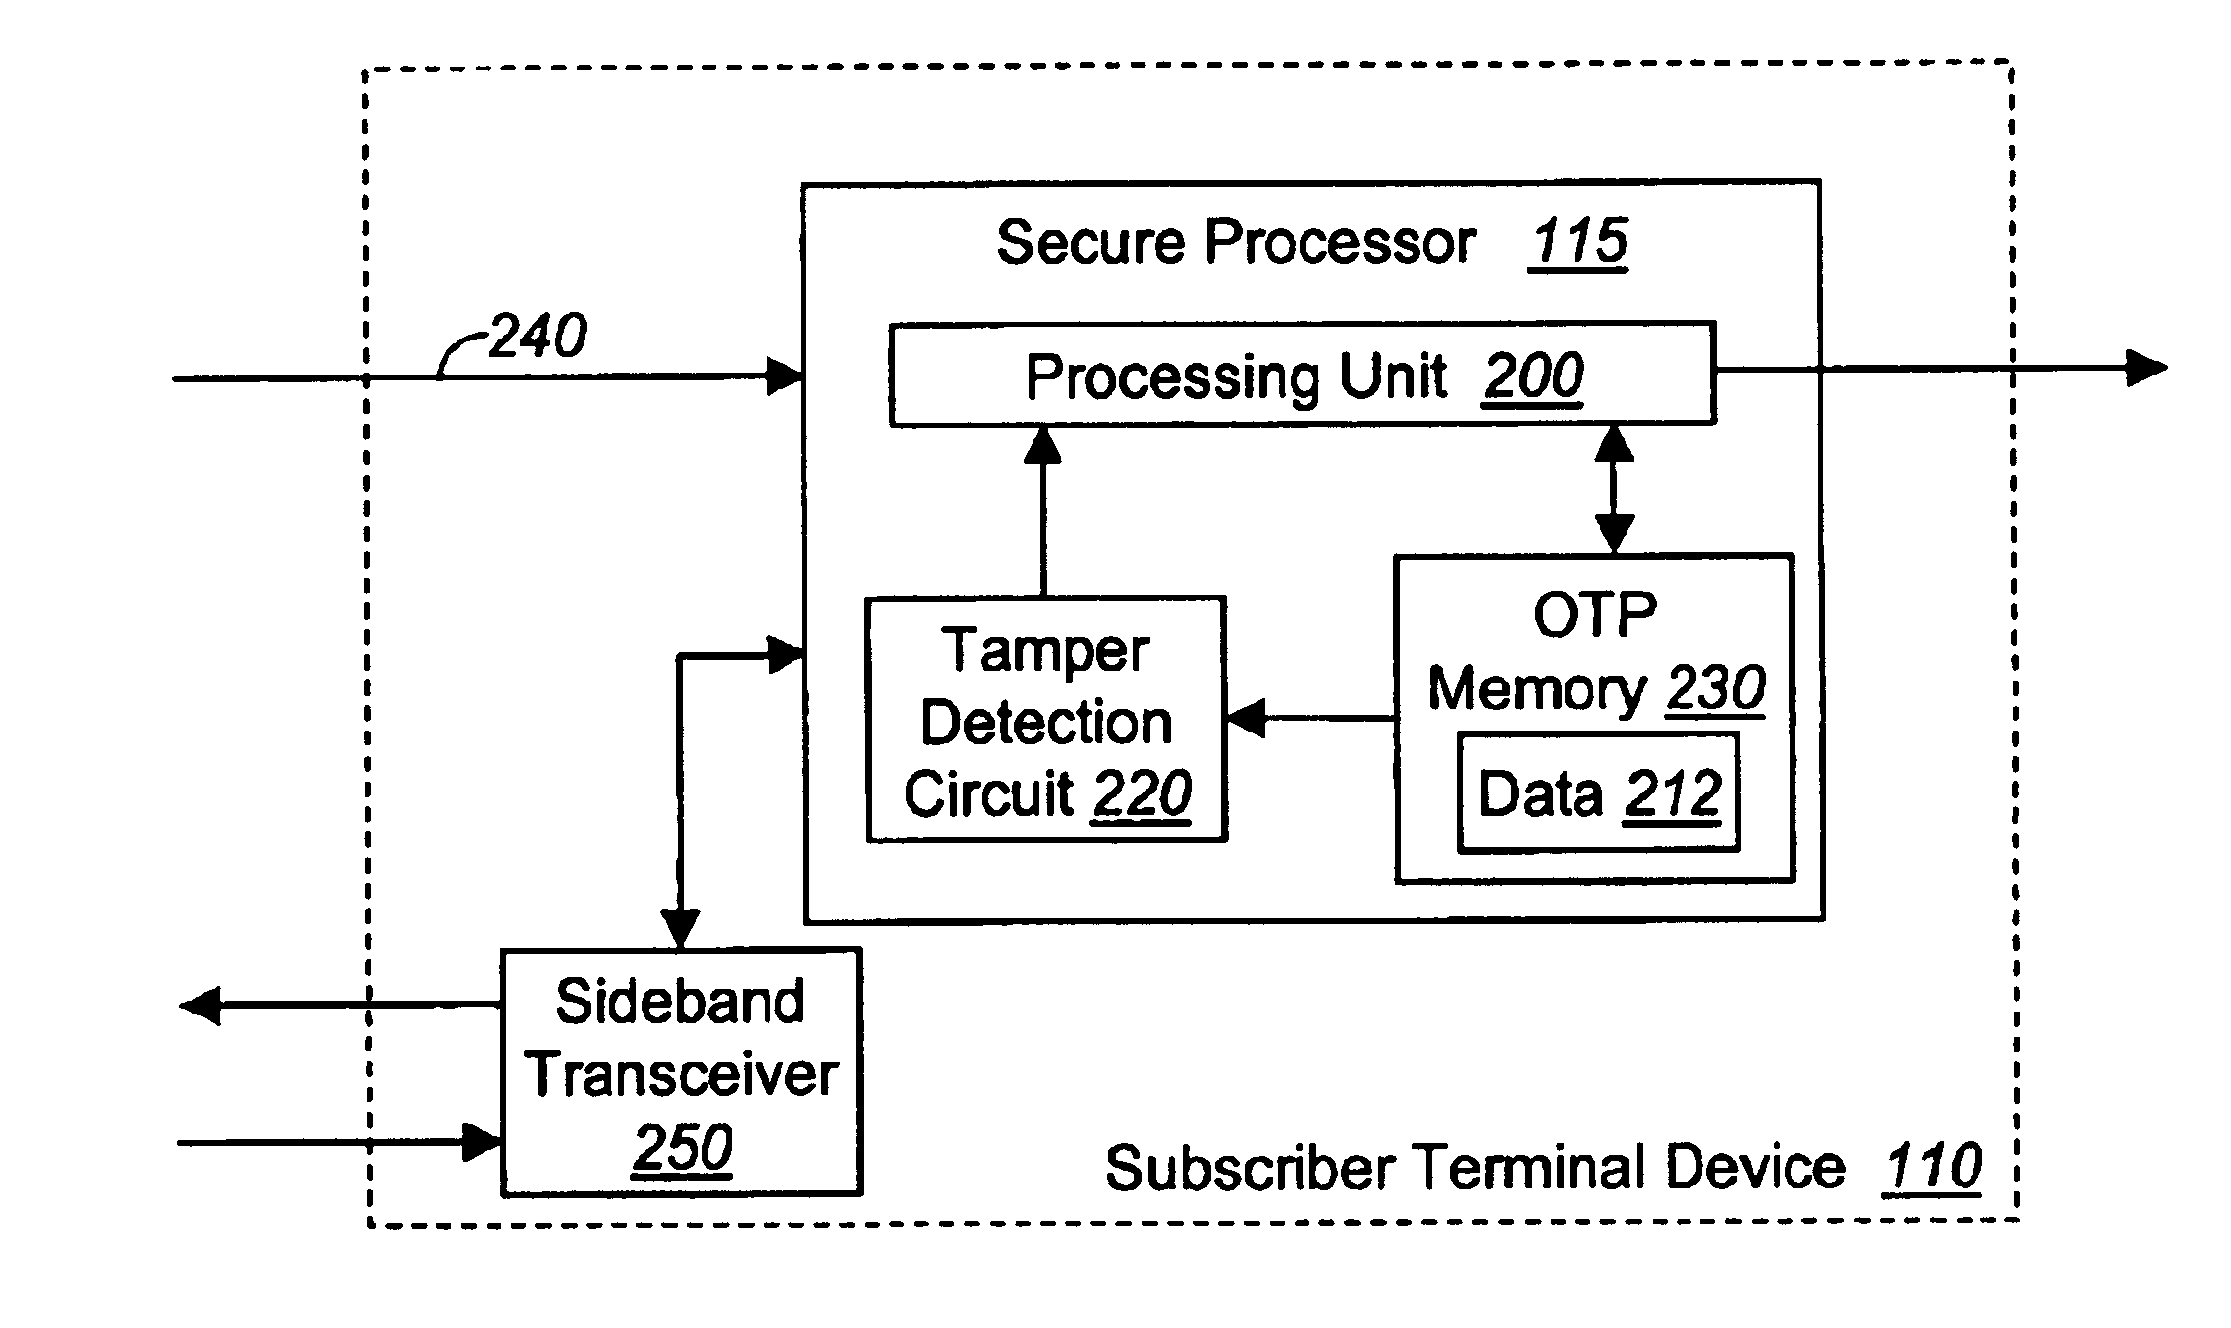 Method for detecting and preventing tampering with one-time programmable digital devices